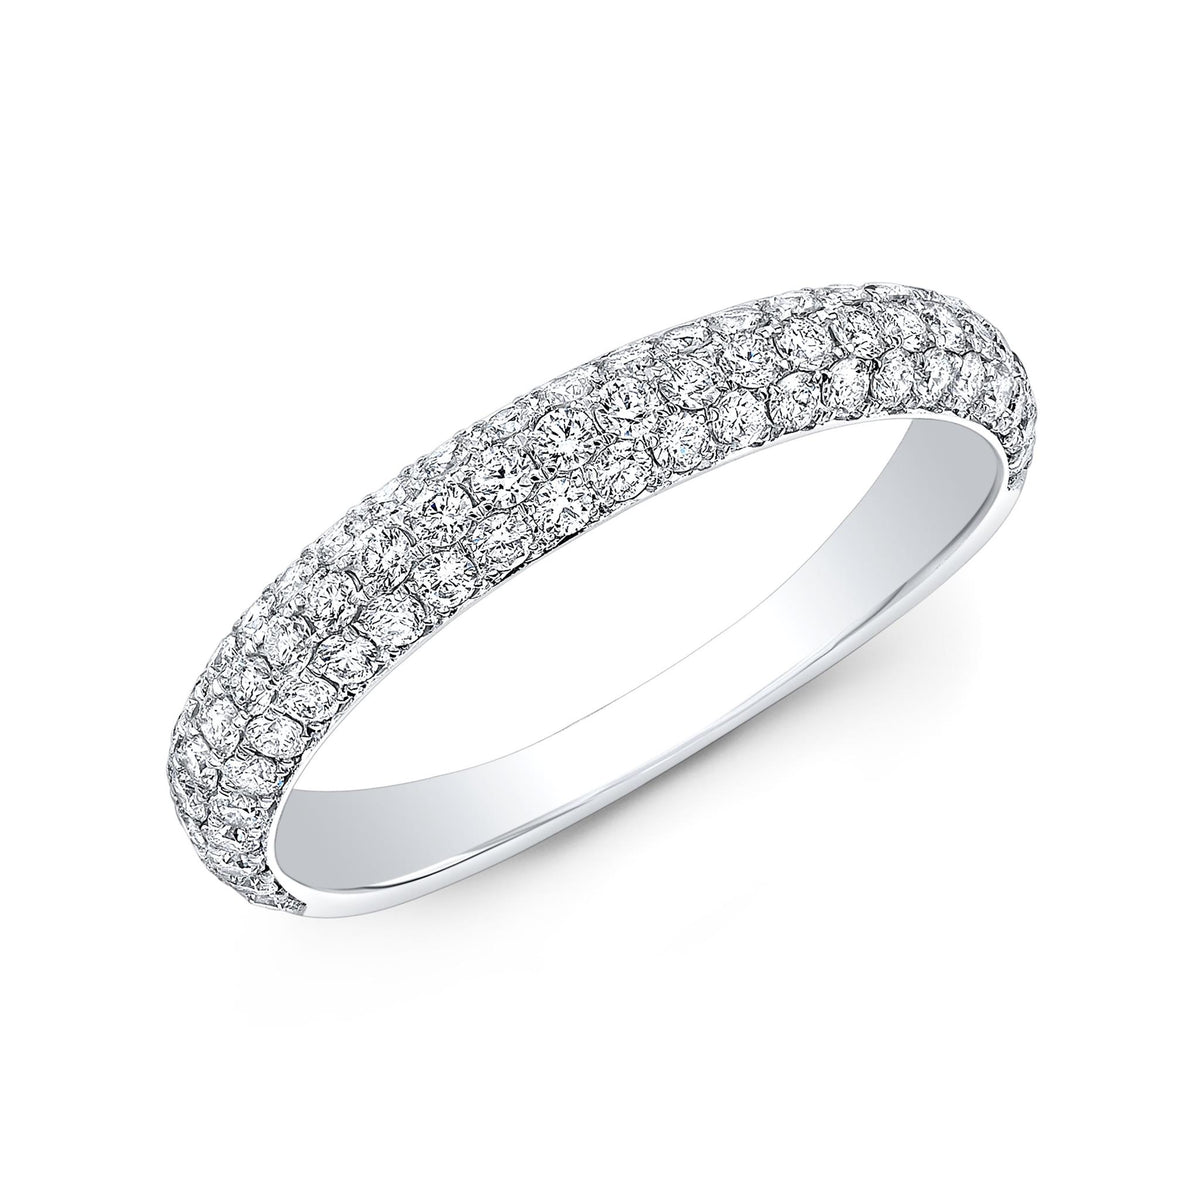 18Kt White Gold Stackable Wedding Ring With 0.29cttw Natural Diamonds